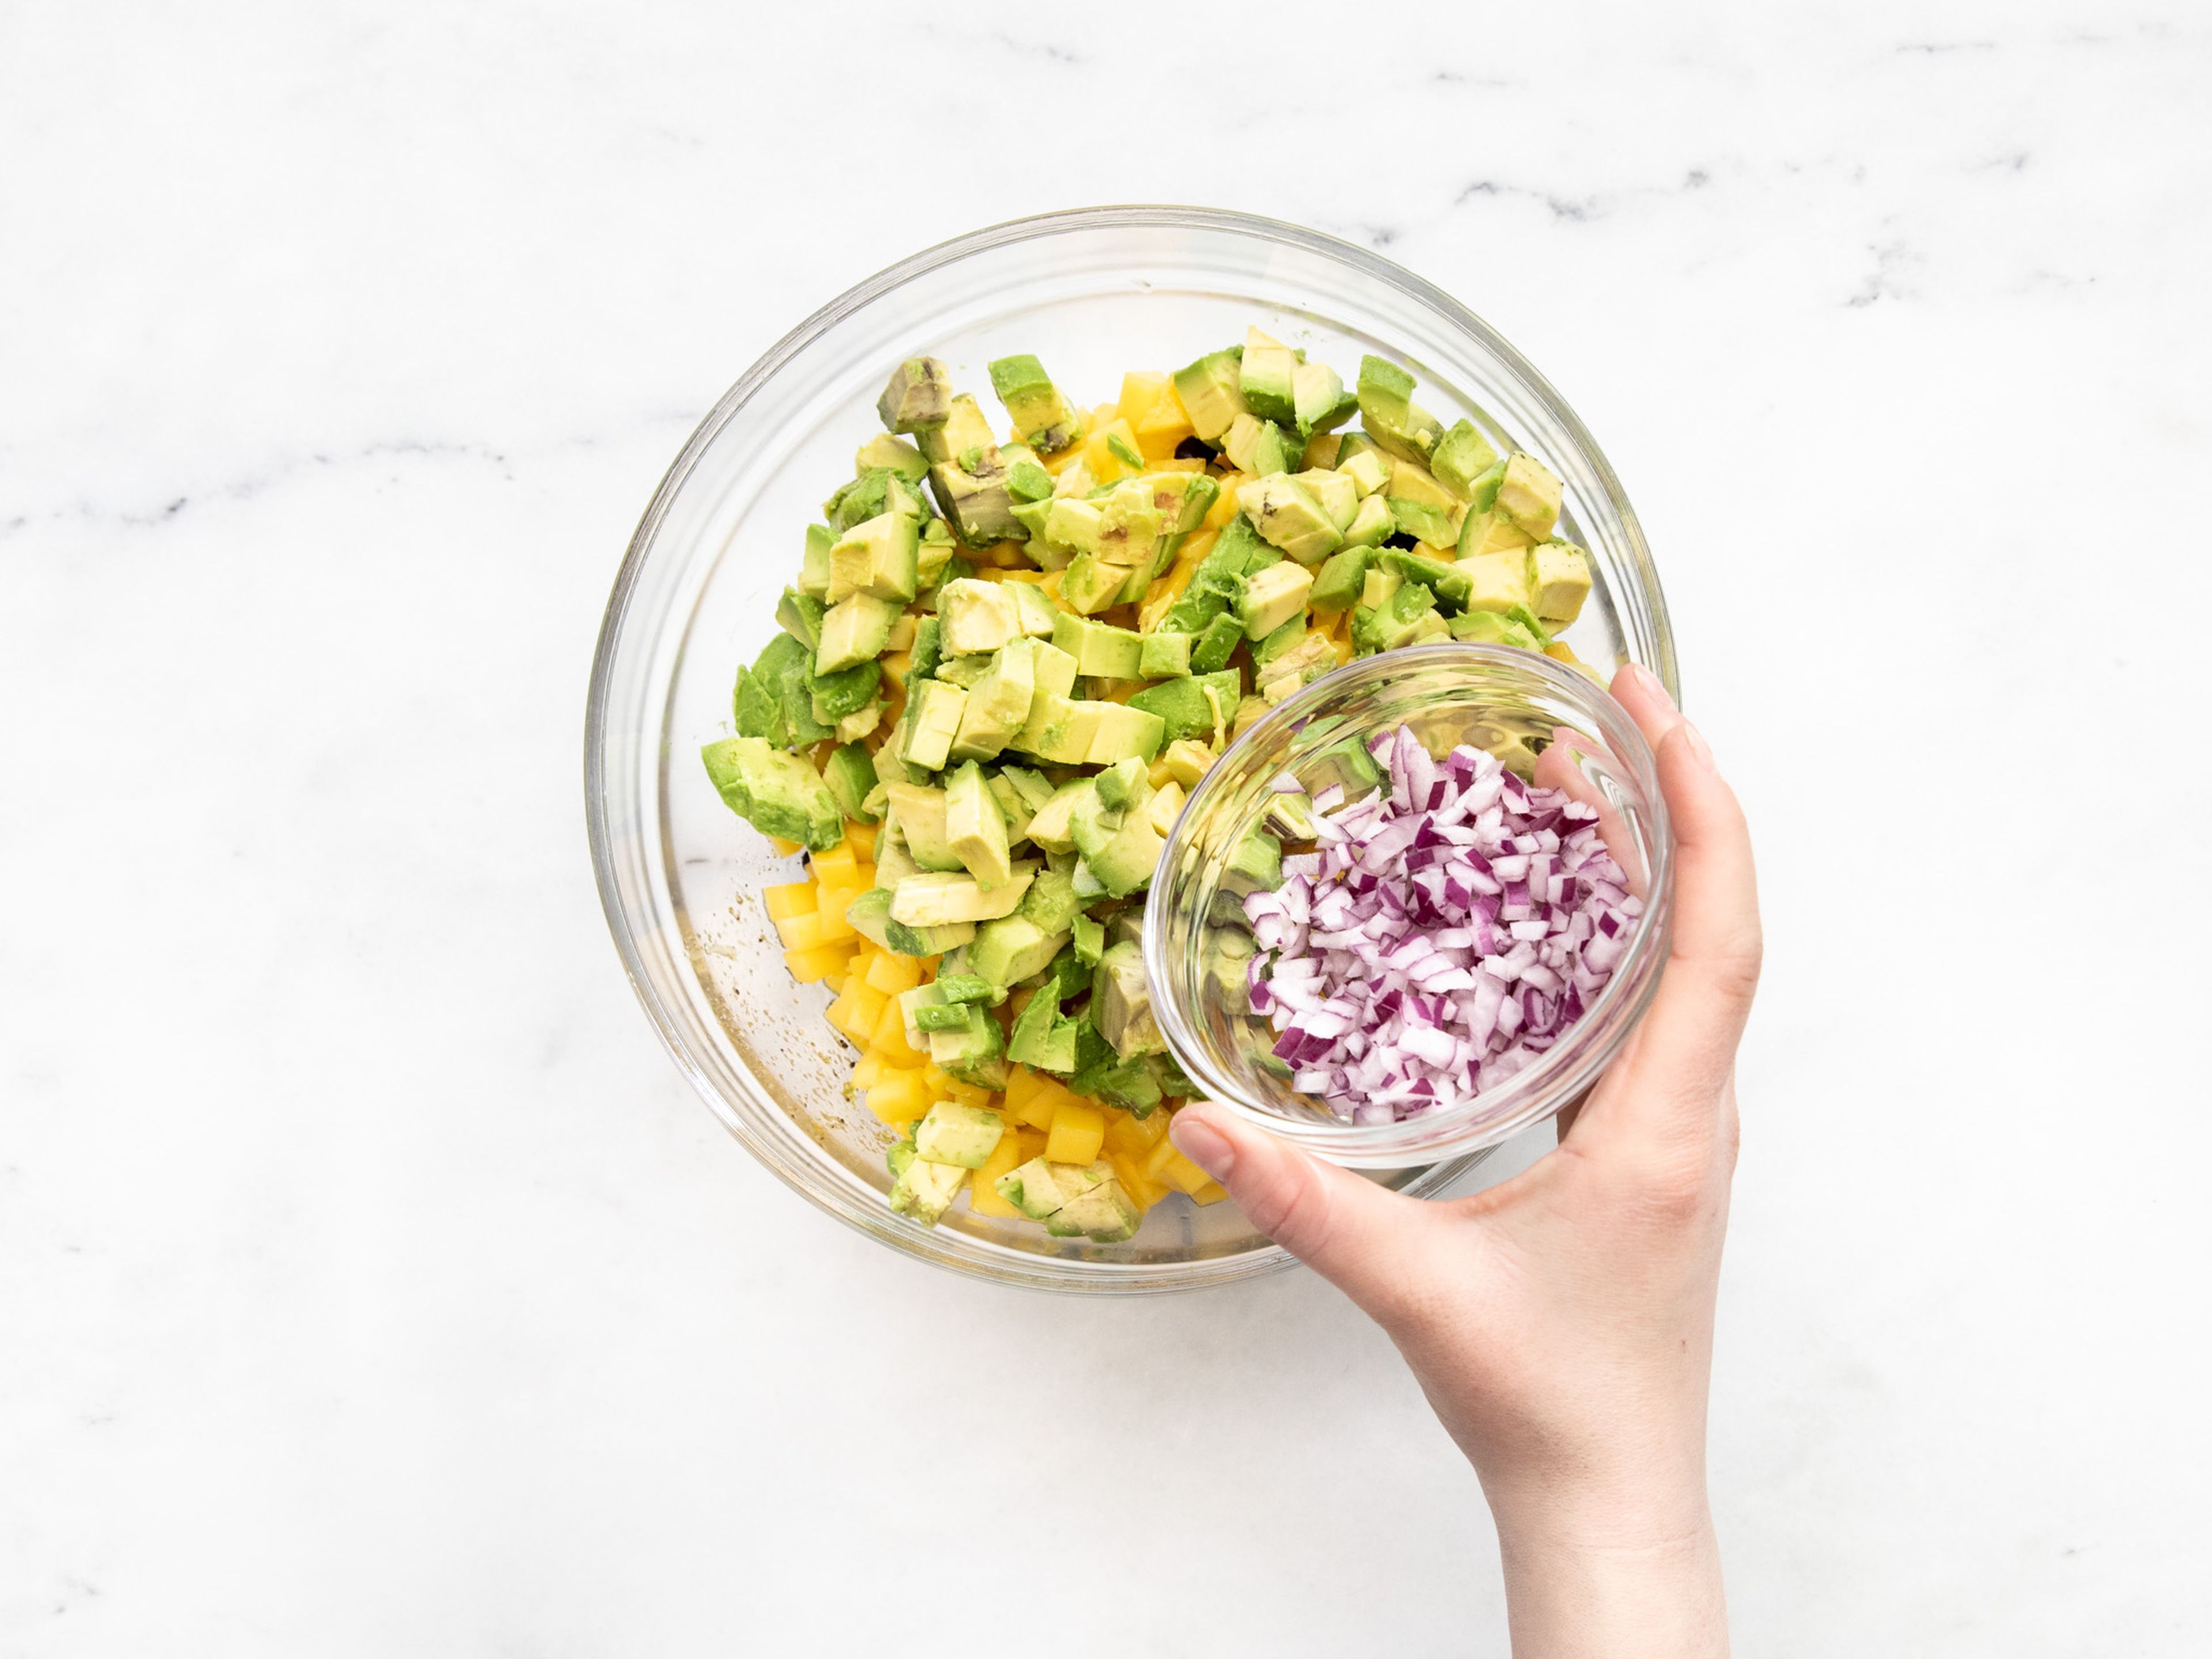 Drain the corn and black beans and add to the bowl with the lime dressing. Mix together with the avocados, mango, and red onion. Serve with tortilla chips and cilantro. Enjoy!